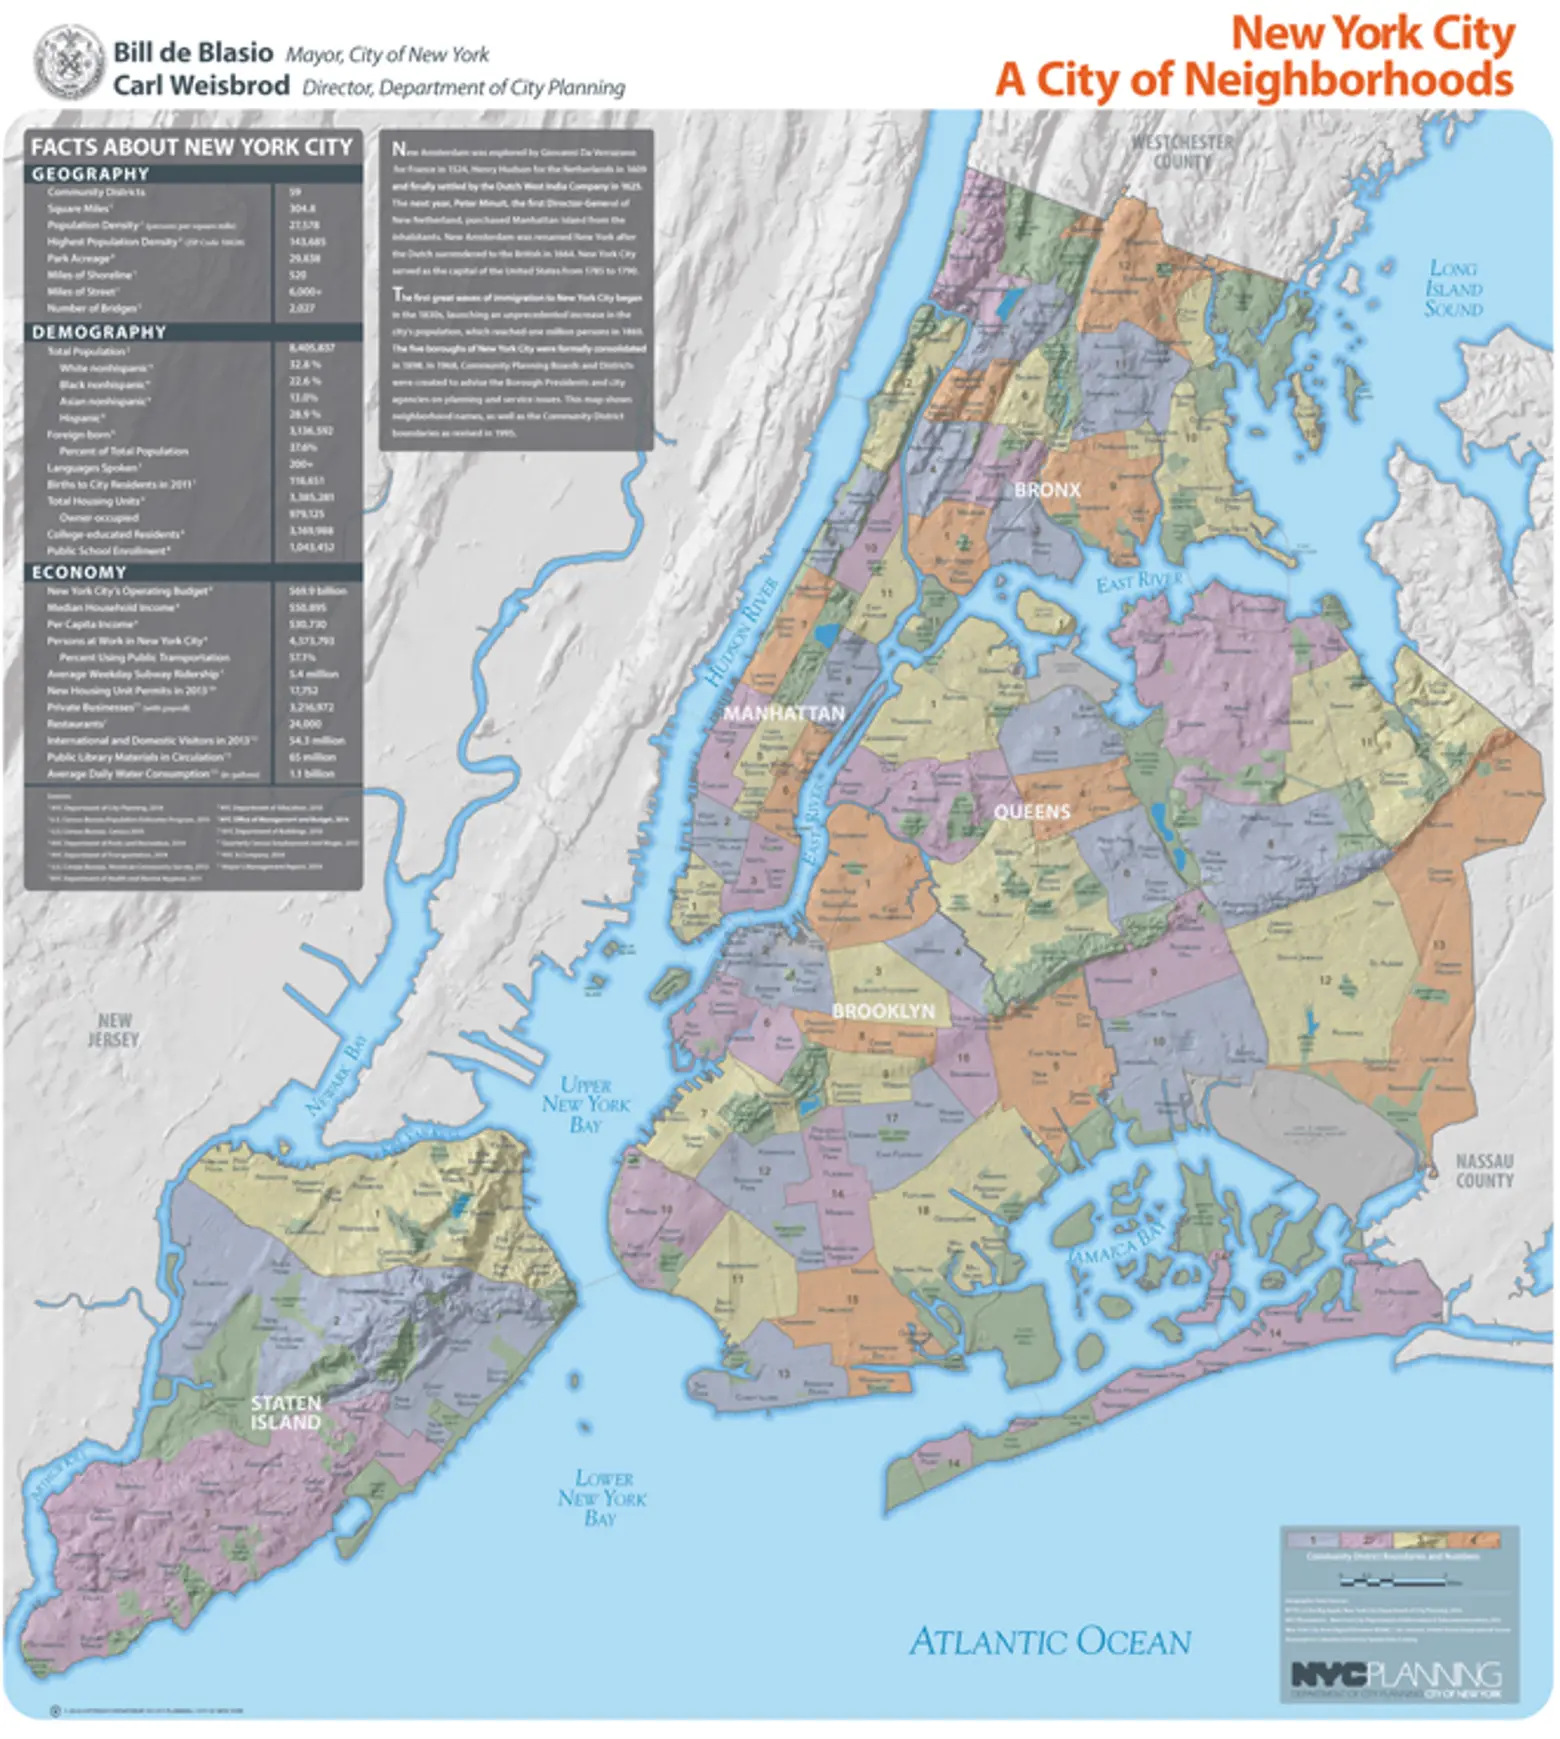 NYC Gets a New Neighborhood Map from the City Planning Department